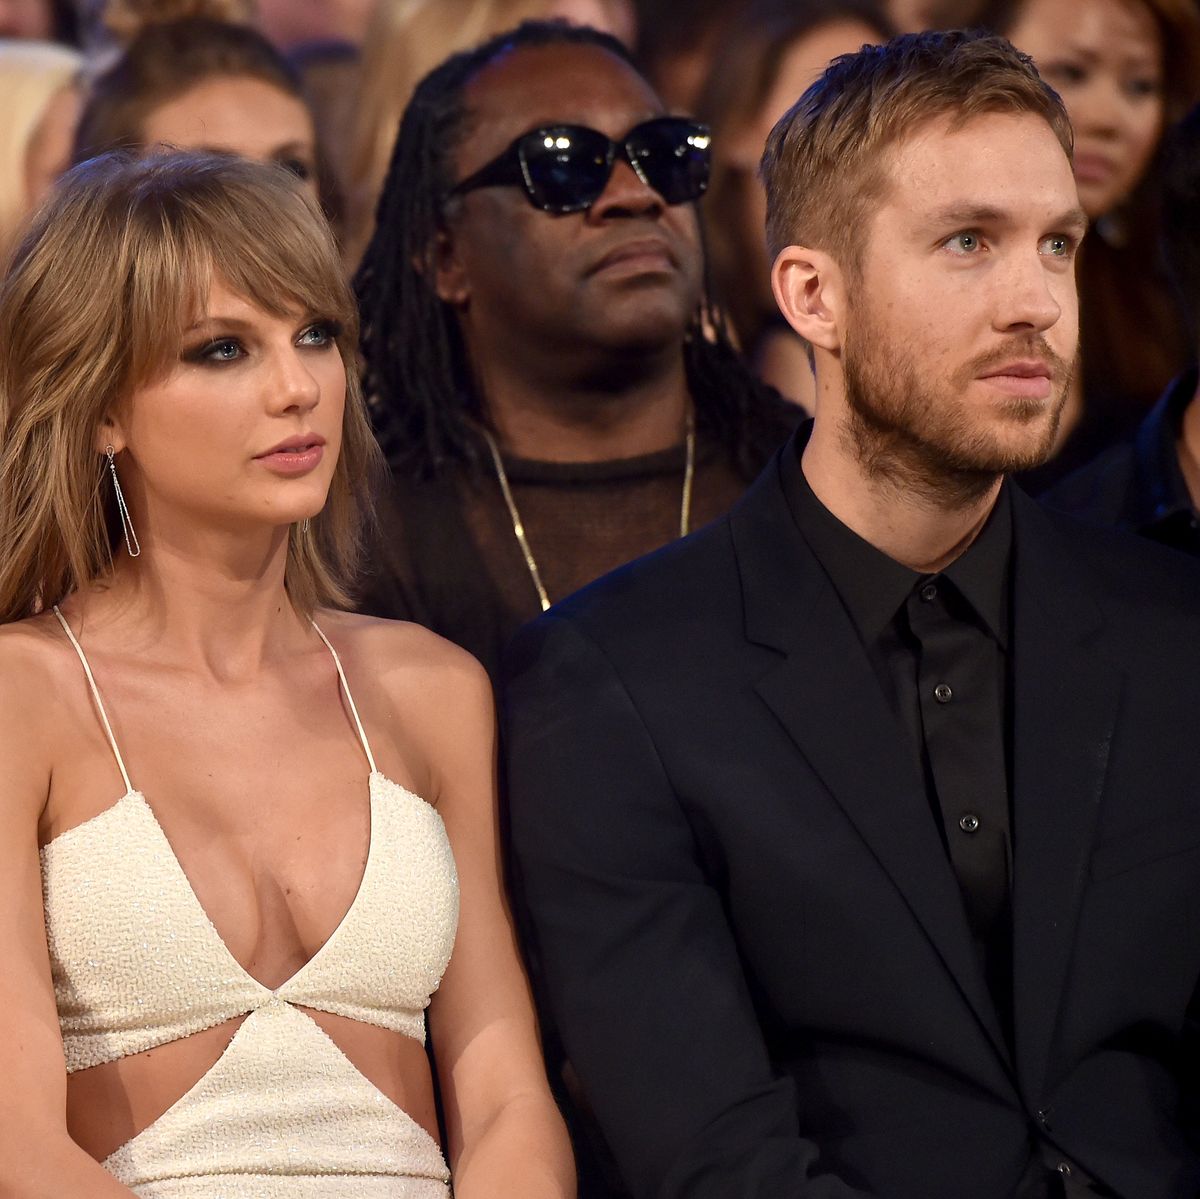 Is 'I Forgot That You Existed' About Kanye West Or Calvin Harris